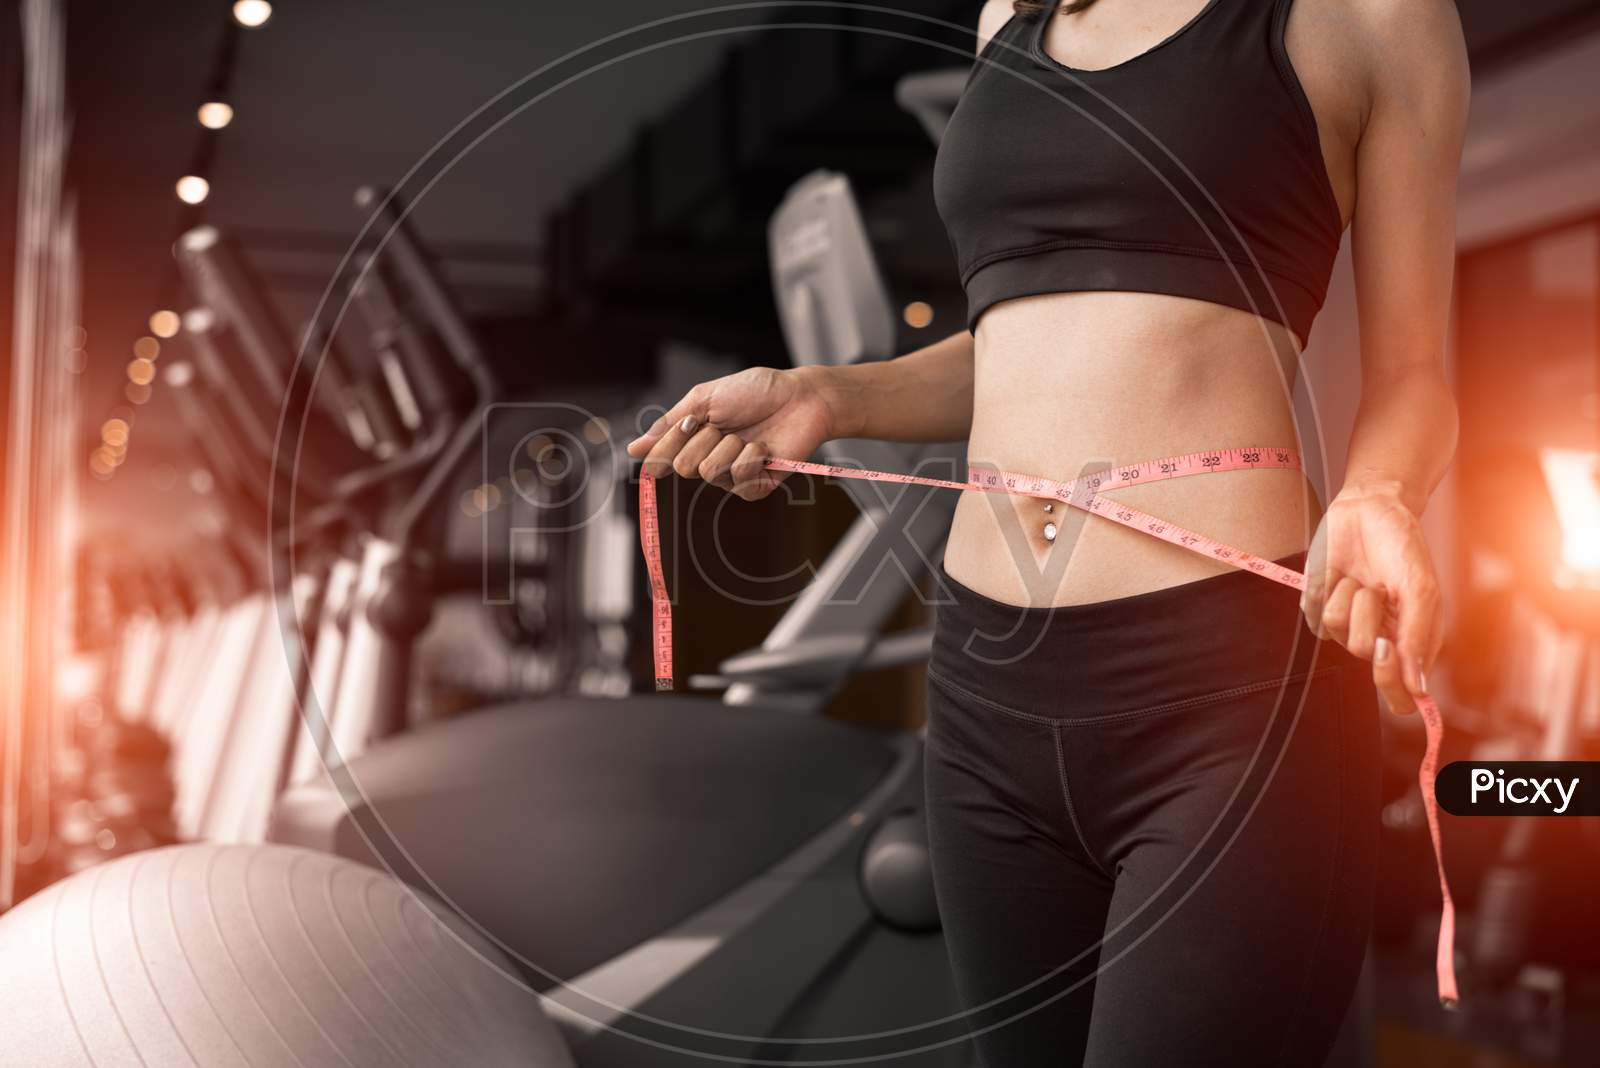 Sporty Woman Using Waist Tape Line In Fitness Gym Sport Club Training Center Near Window With Condominium Background. Lifestyle Of People Workout Exercise Sport Activity. Diet And Weight Loss Theme.